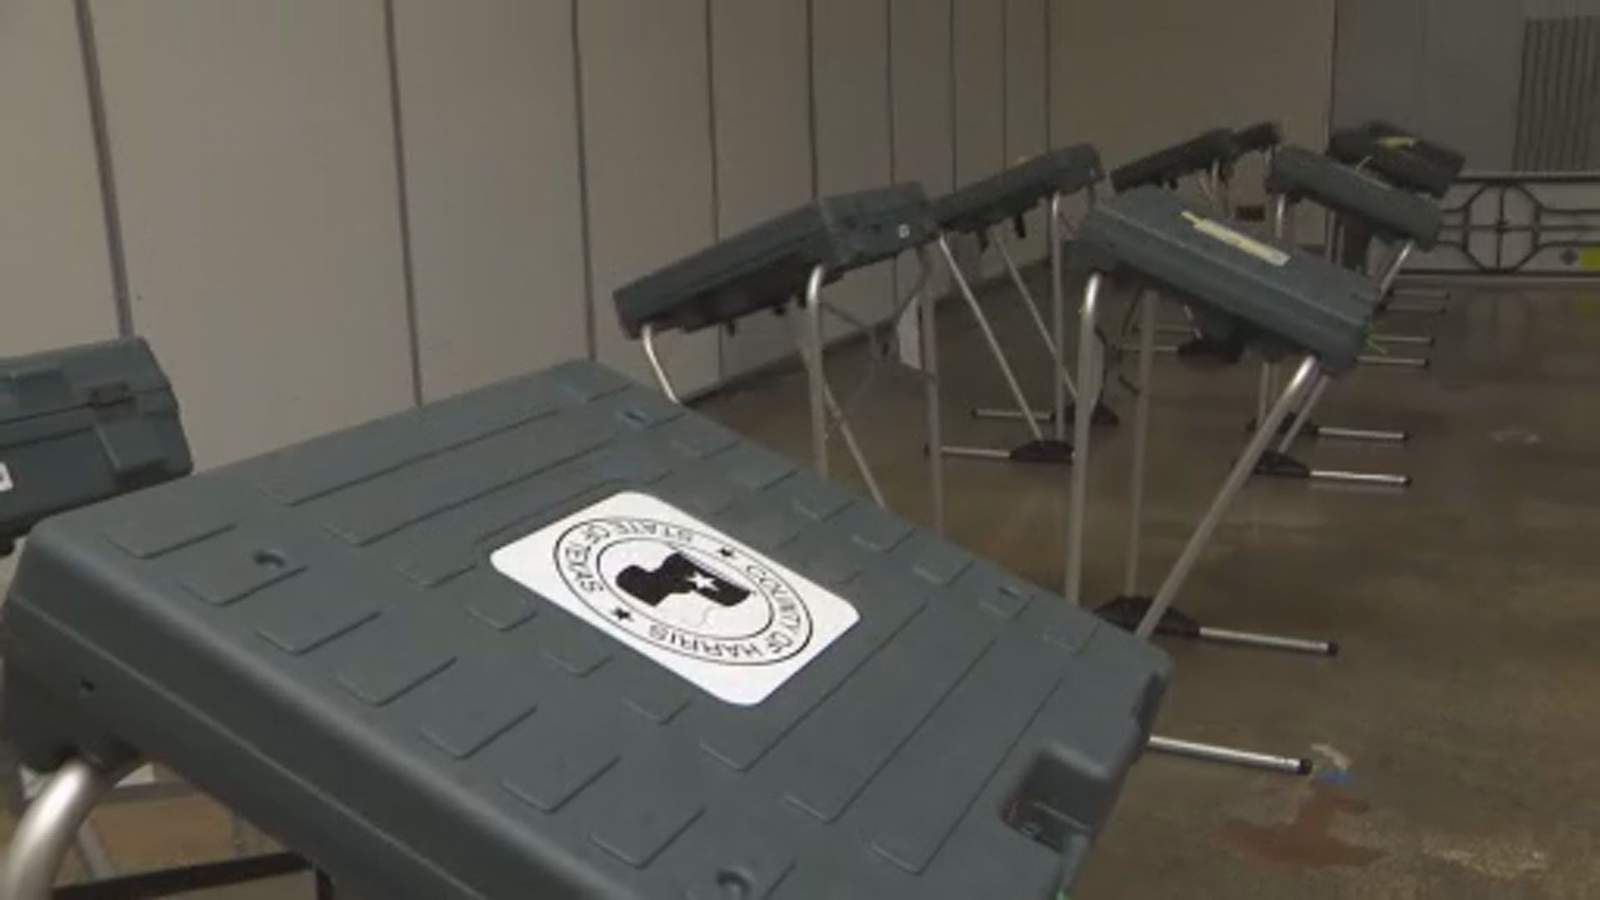 Houston Food Bank becomes one of 122 Harris County polling places